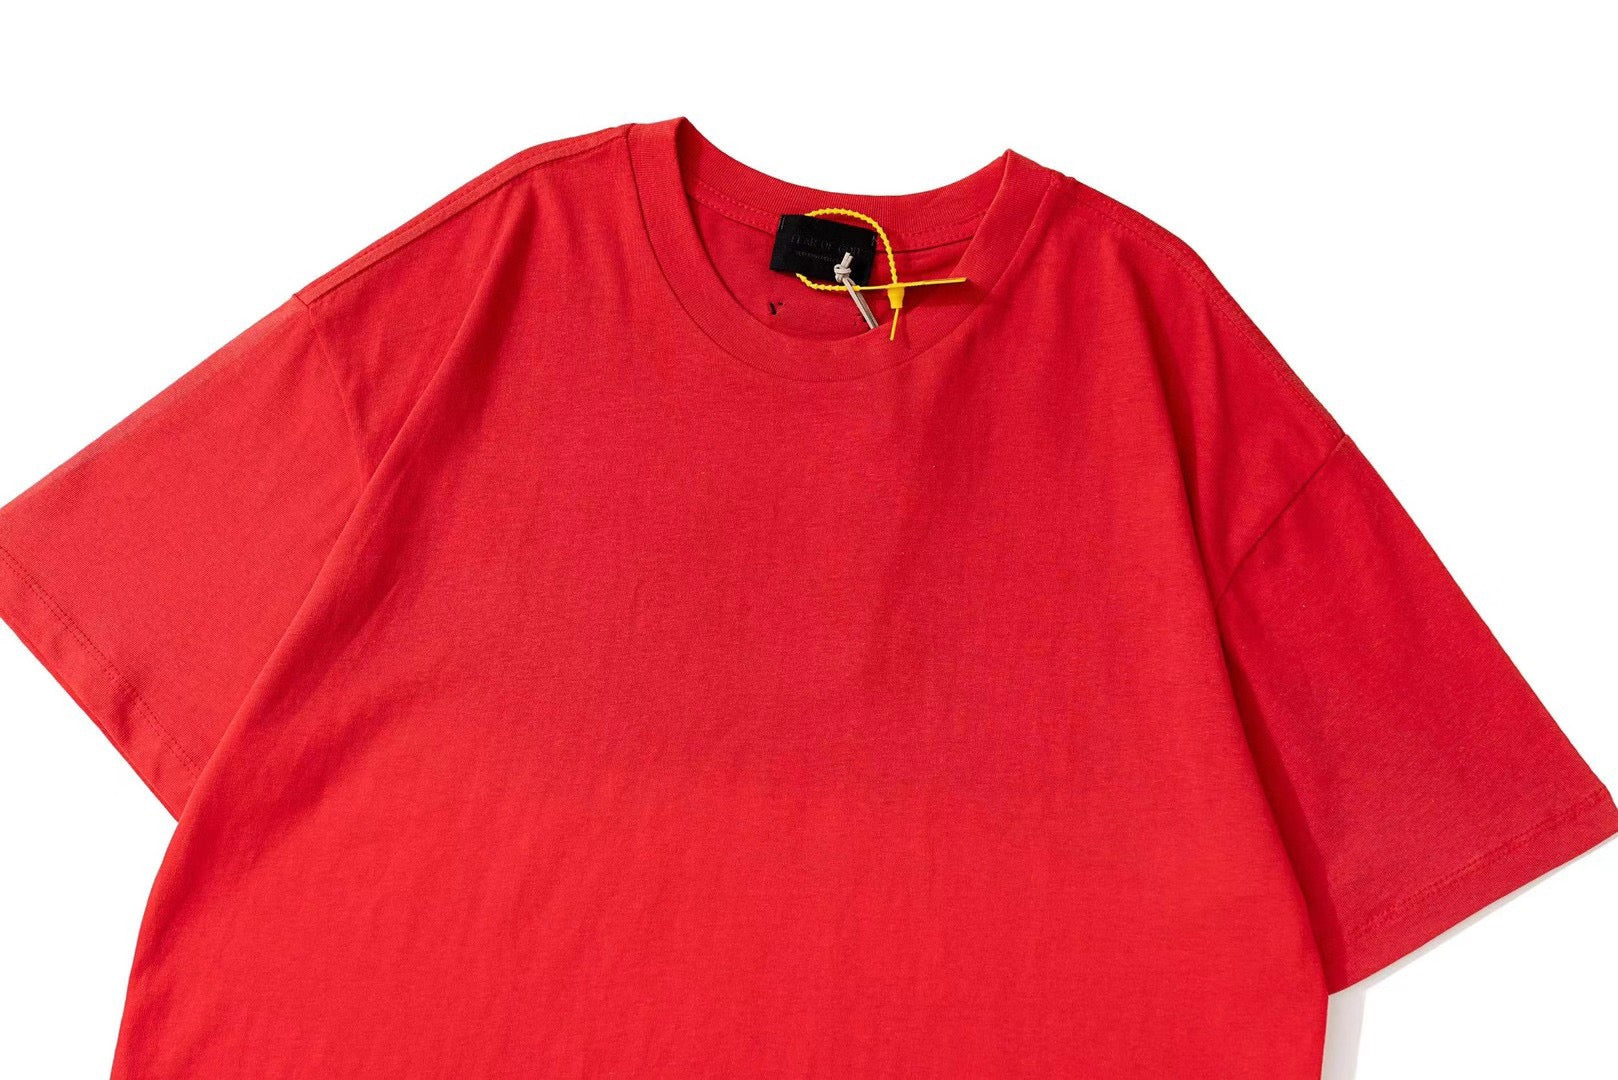 FEAR OF GOD Red T-Shirt